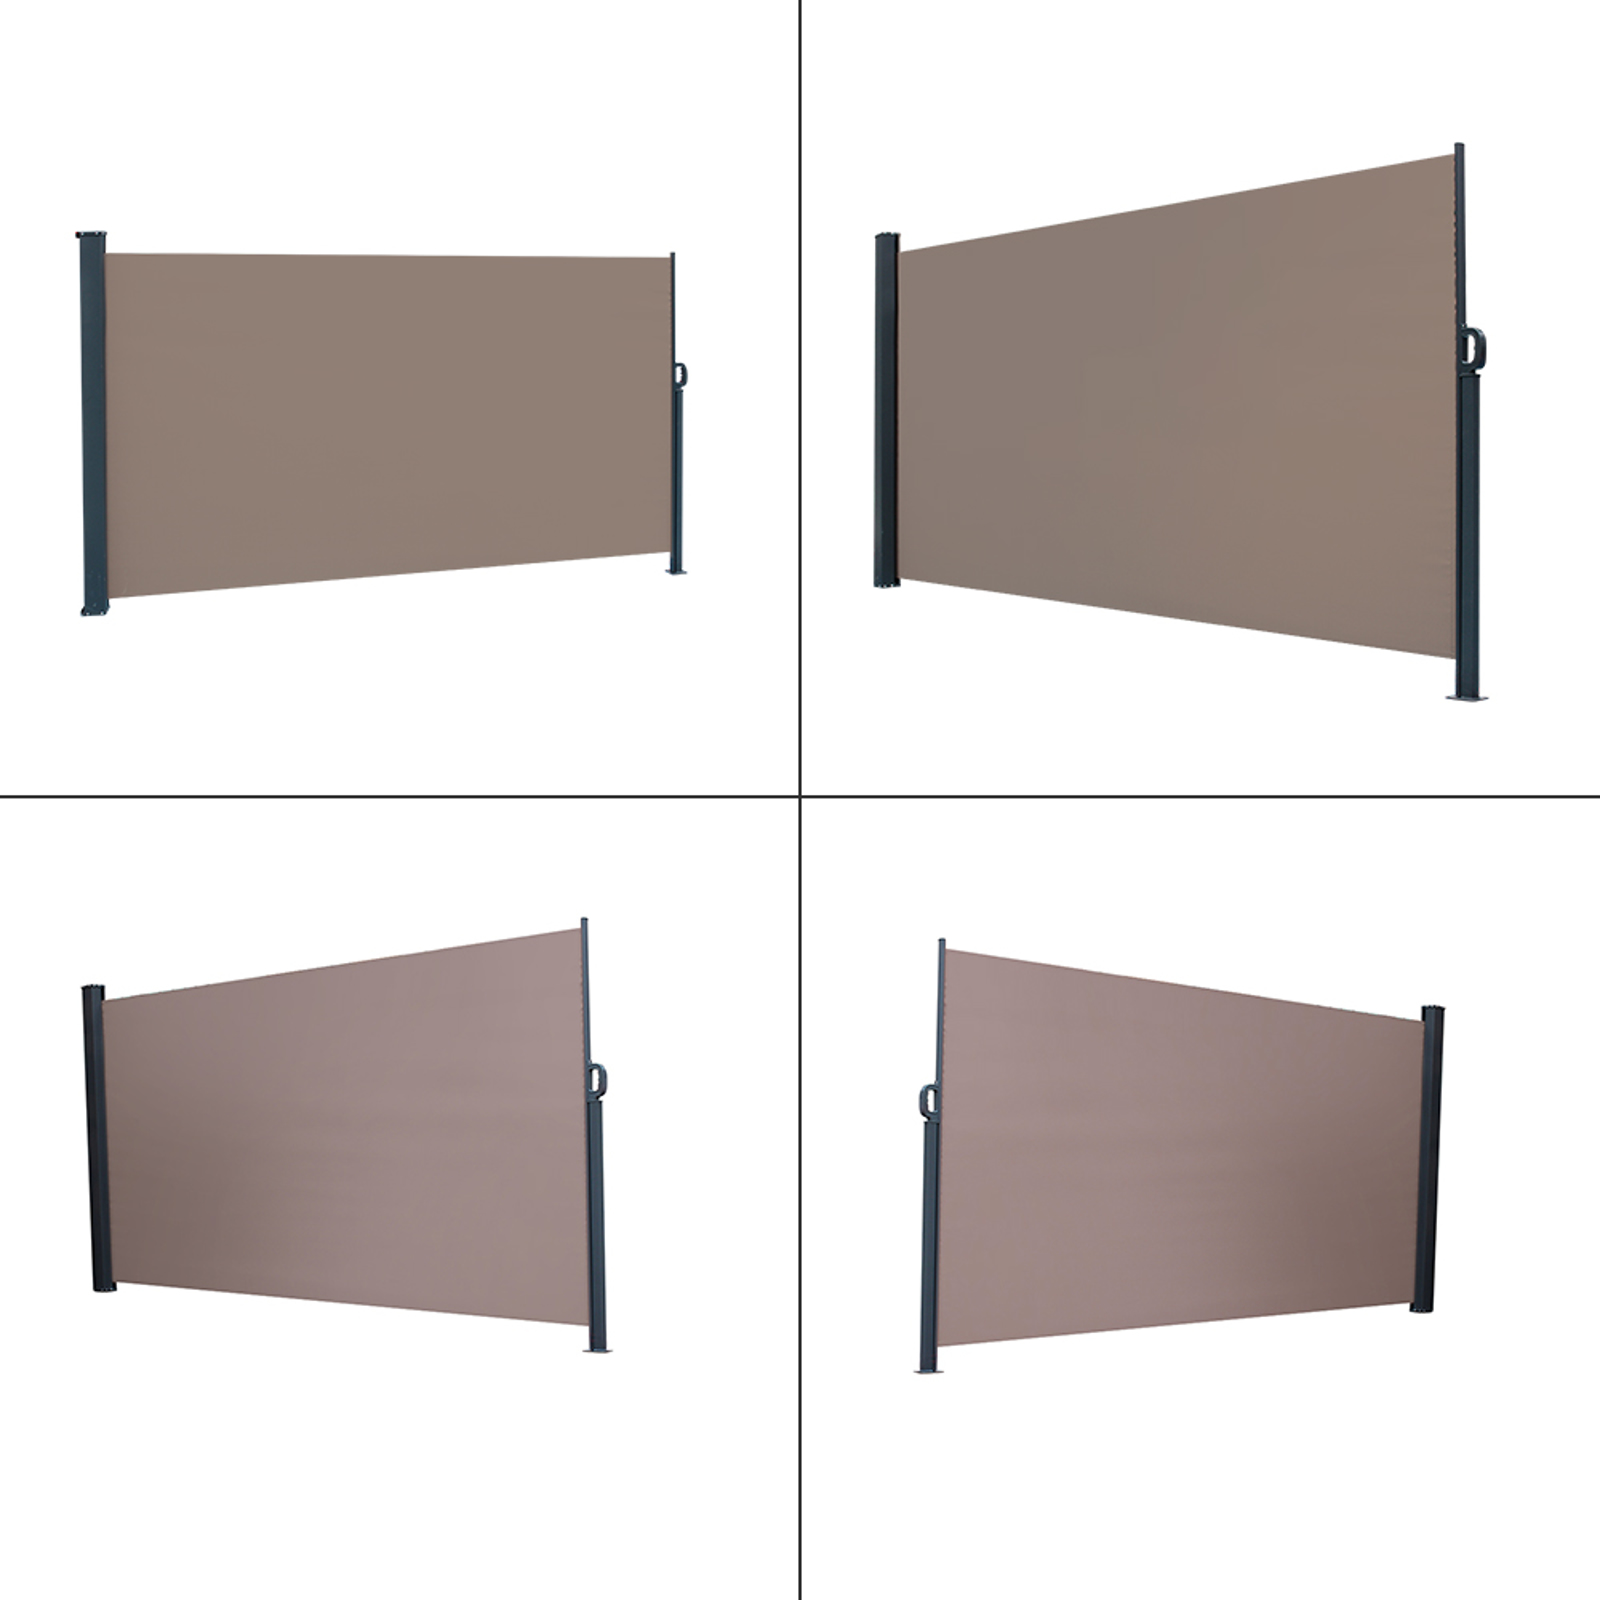 118" x 71" Outdoor Aluminum Handle Pentacle Side Pull Shed Office Partition Cafe Terrace Windshield Isolation Canopy Brown,durable and wear-resistant,Brown - image 5 of 9